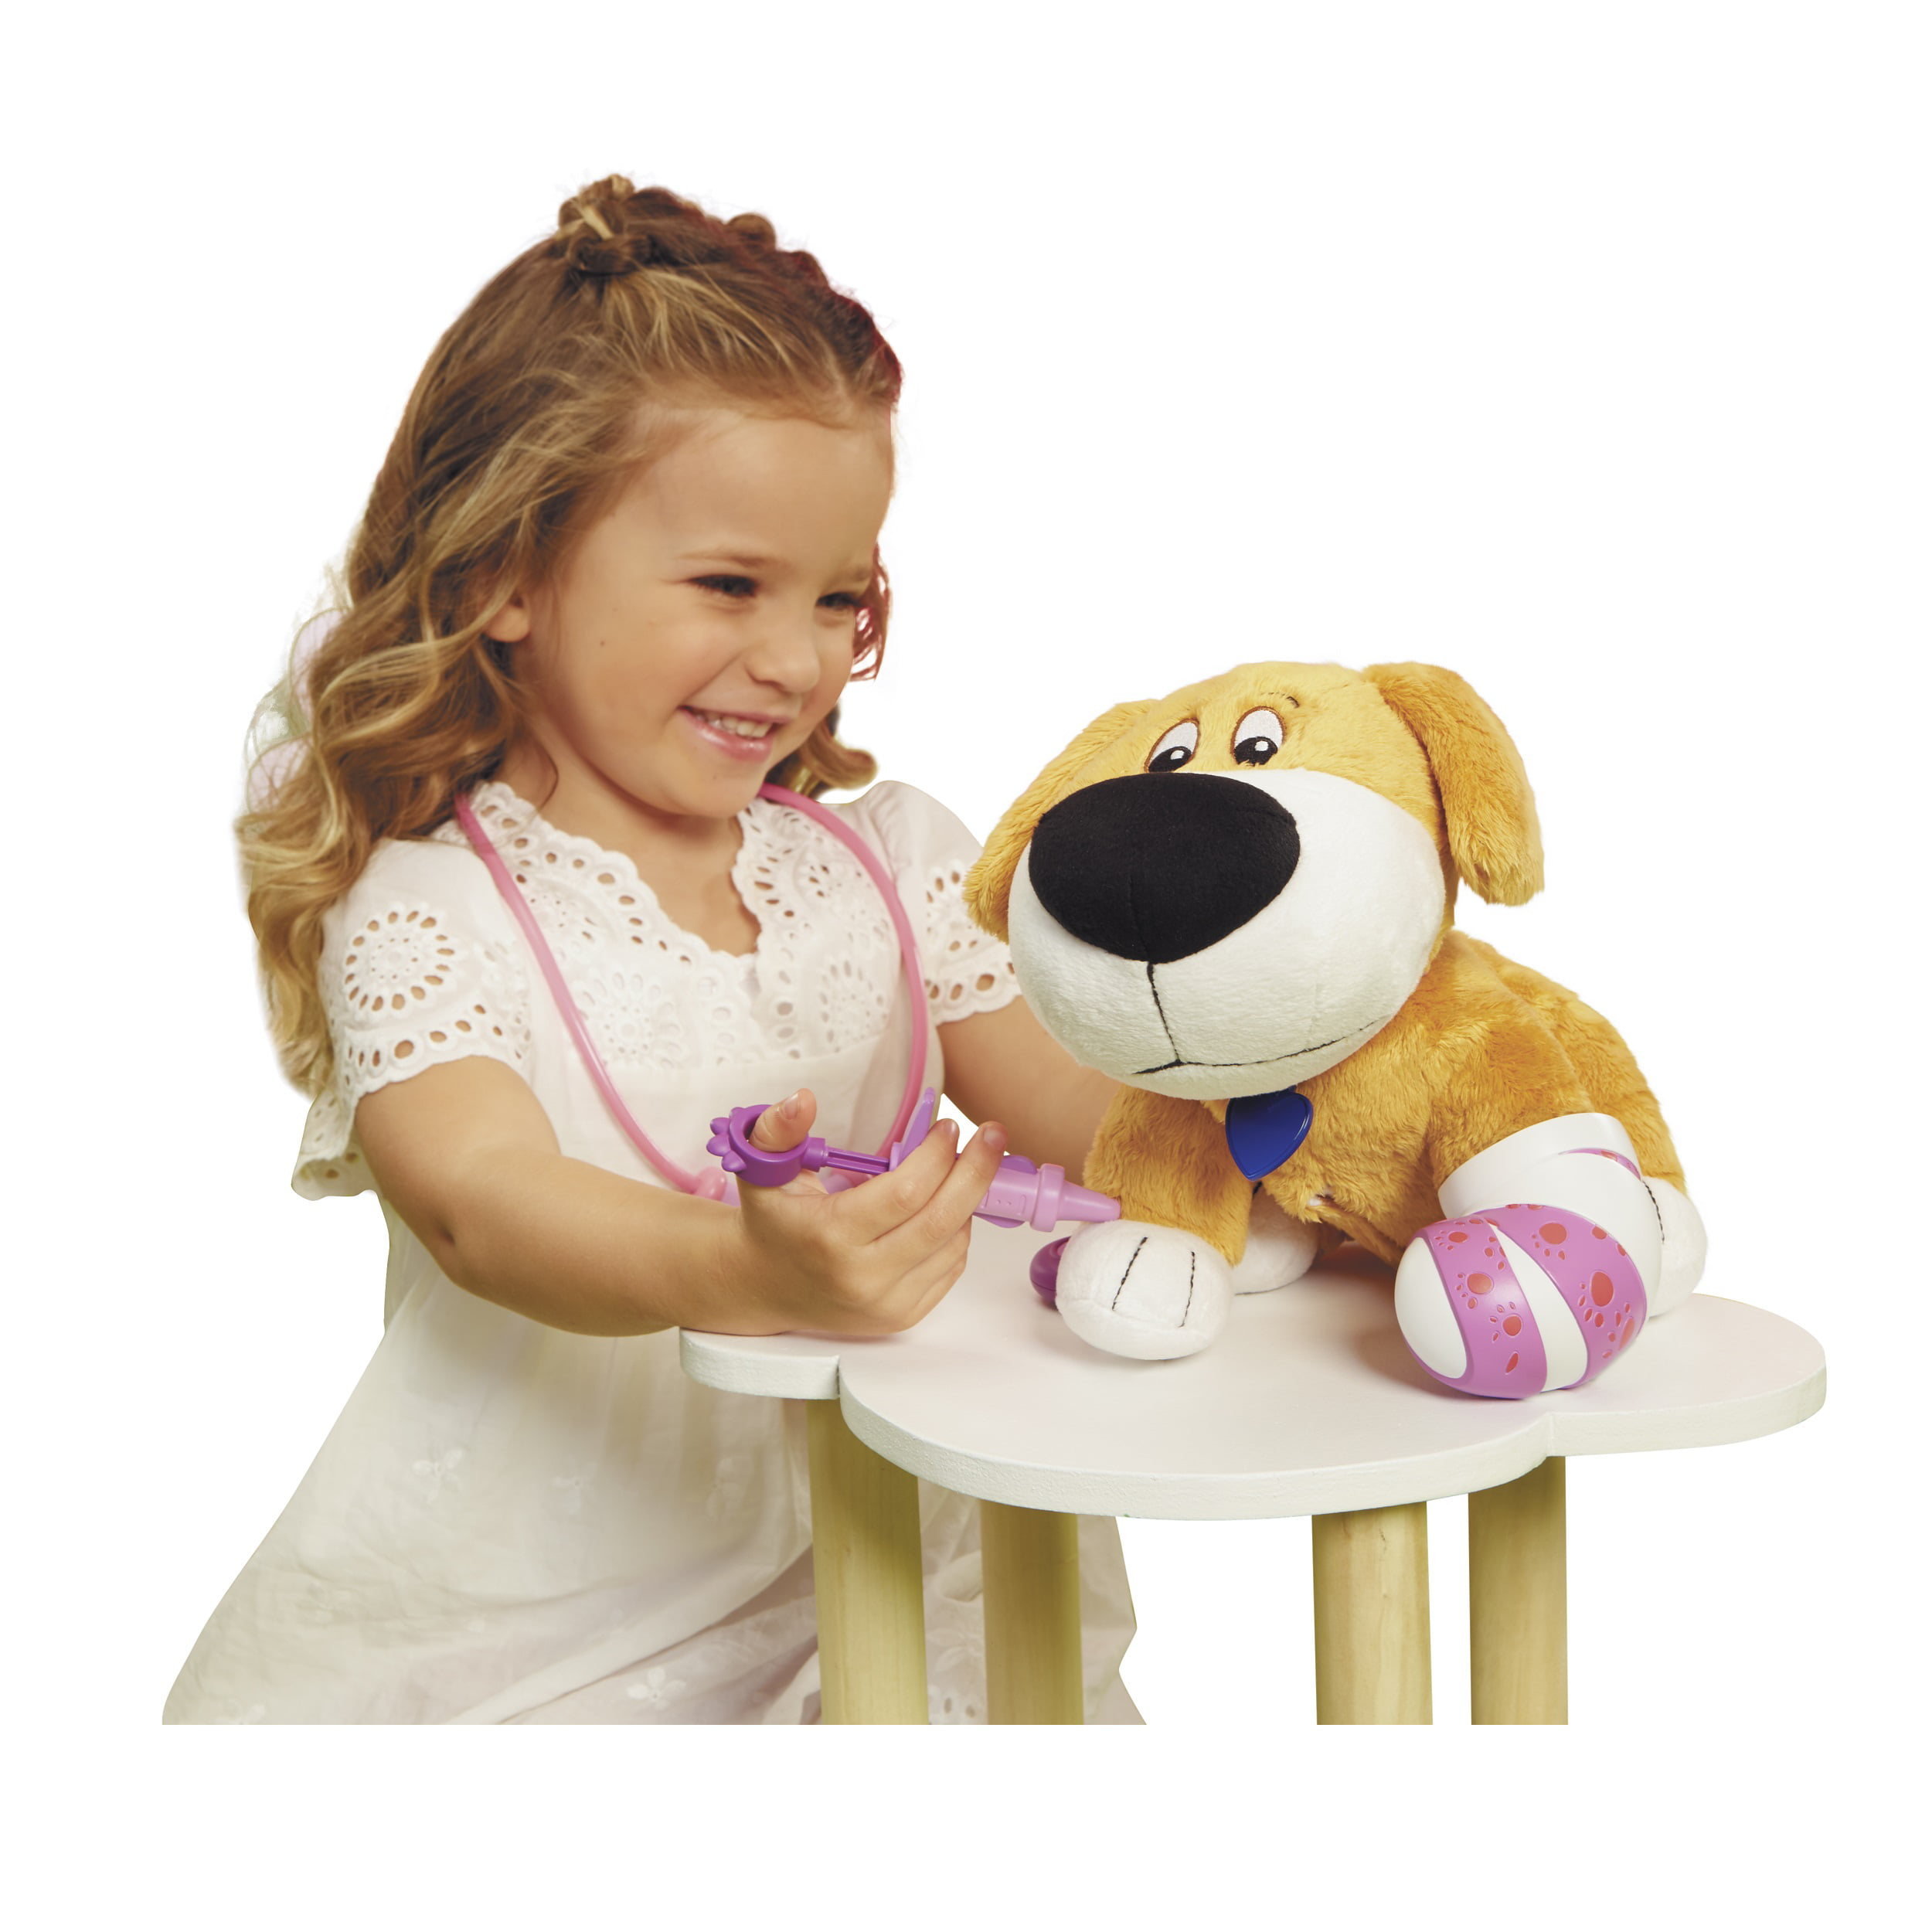 Make Me Better Mitts Plush Interactive Pet From Lilly Tikes by Little Tikes